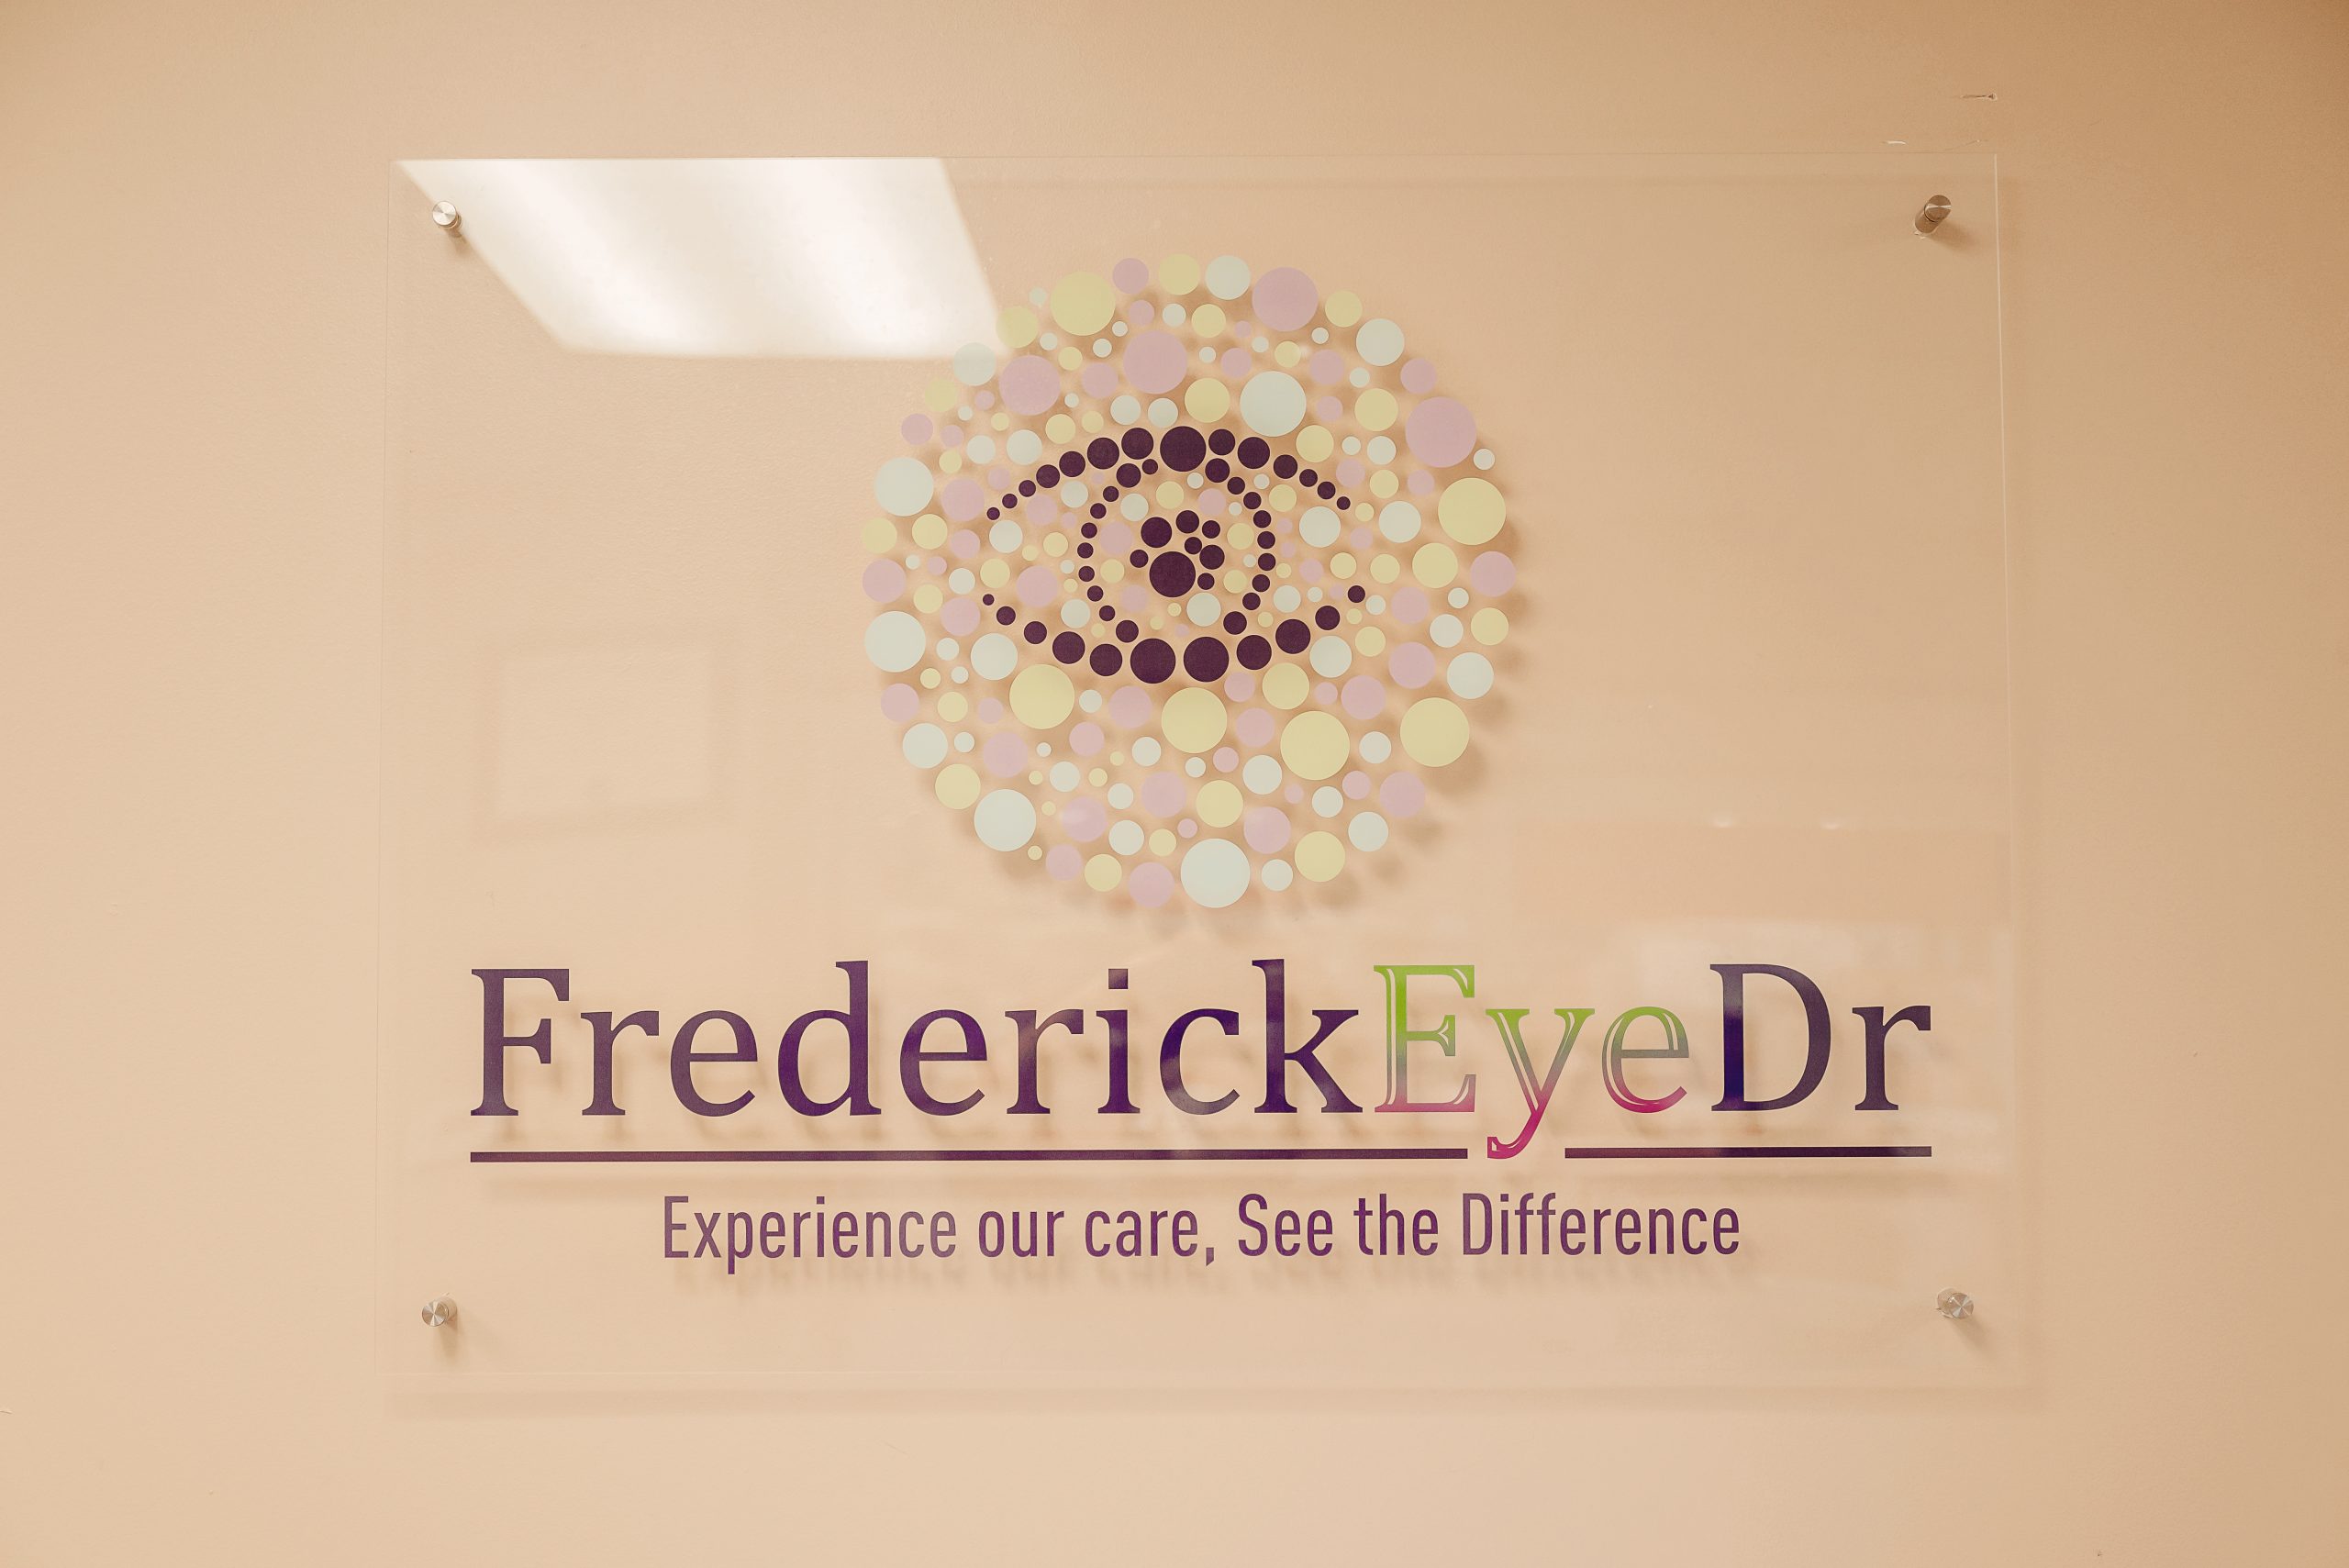 Frederick Eye Dr: Experience our eye care. See the difference